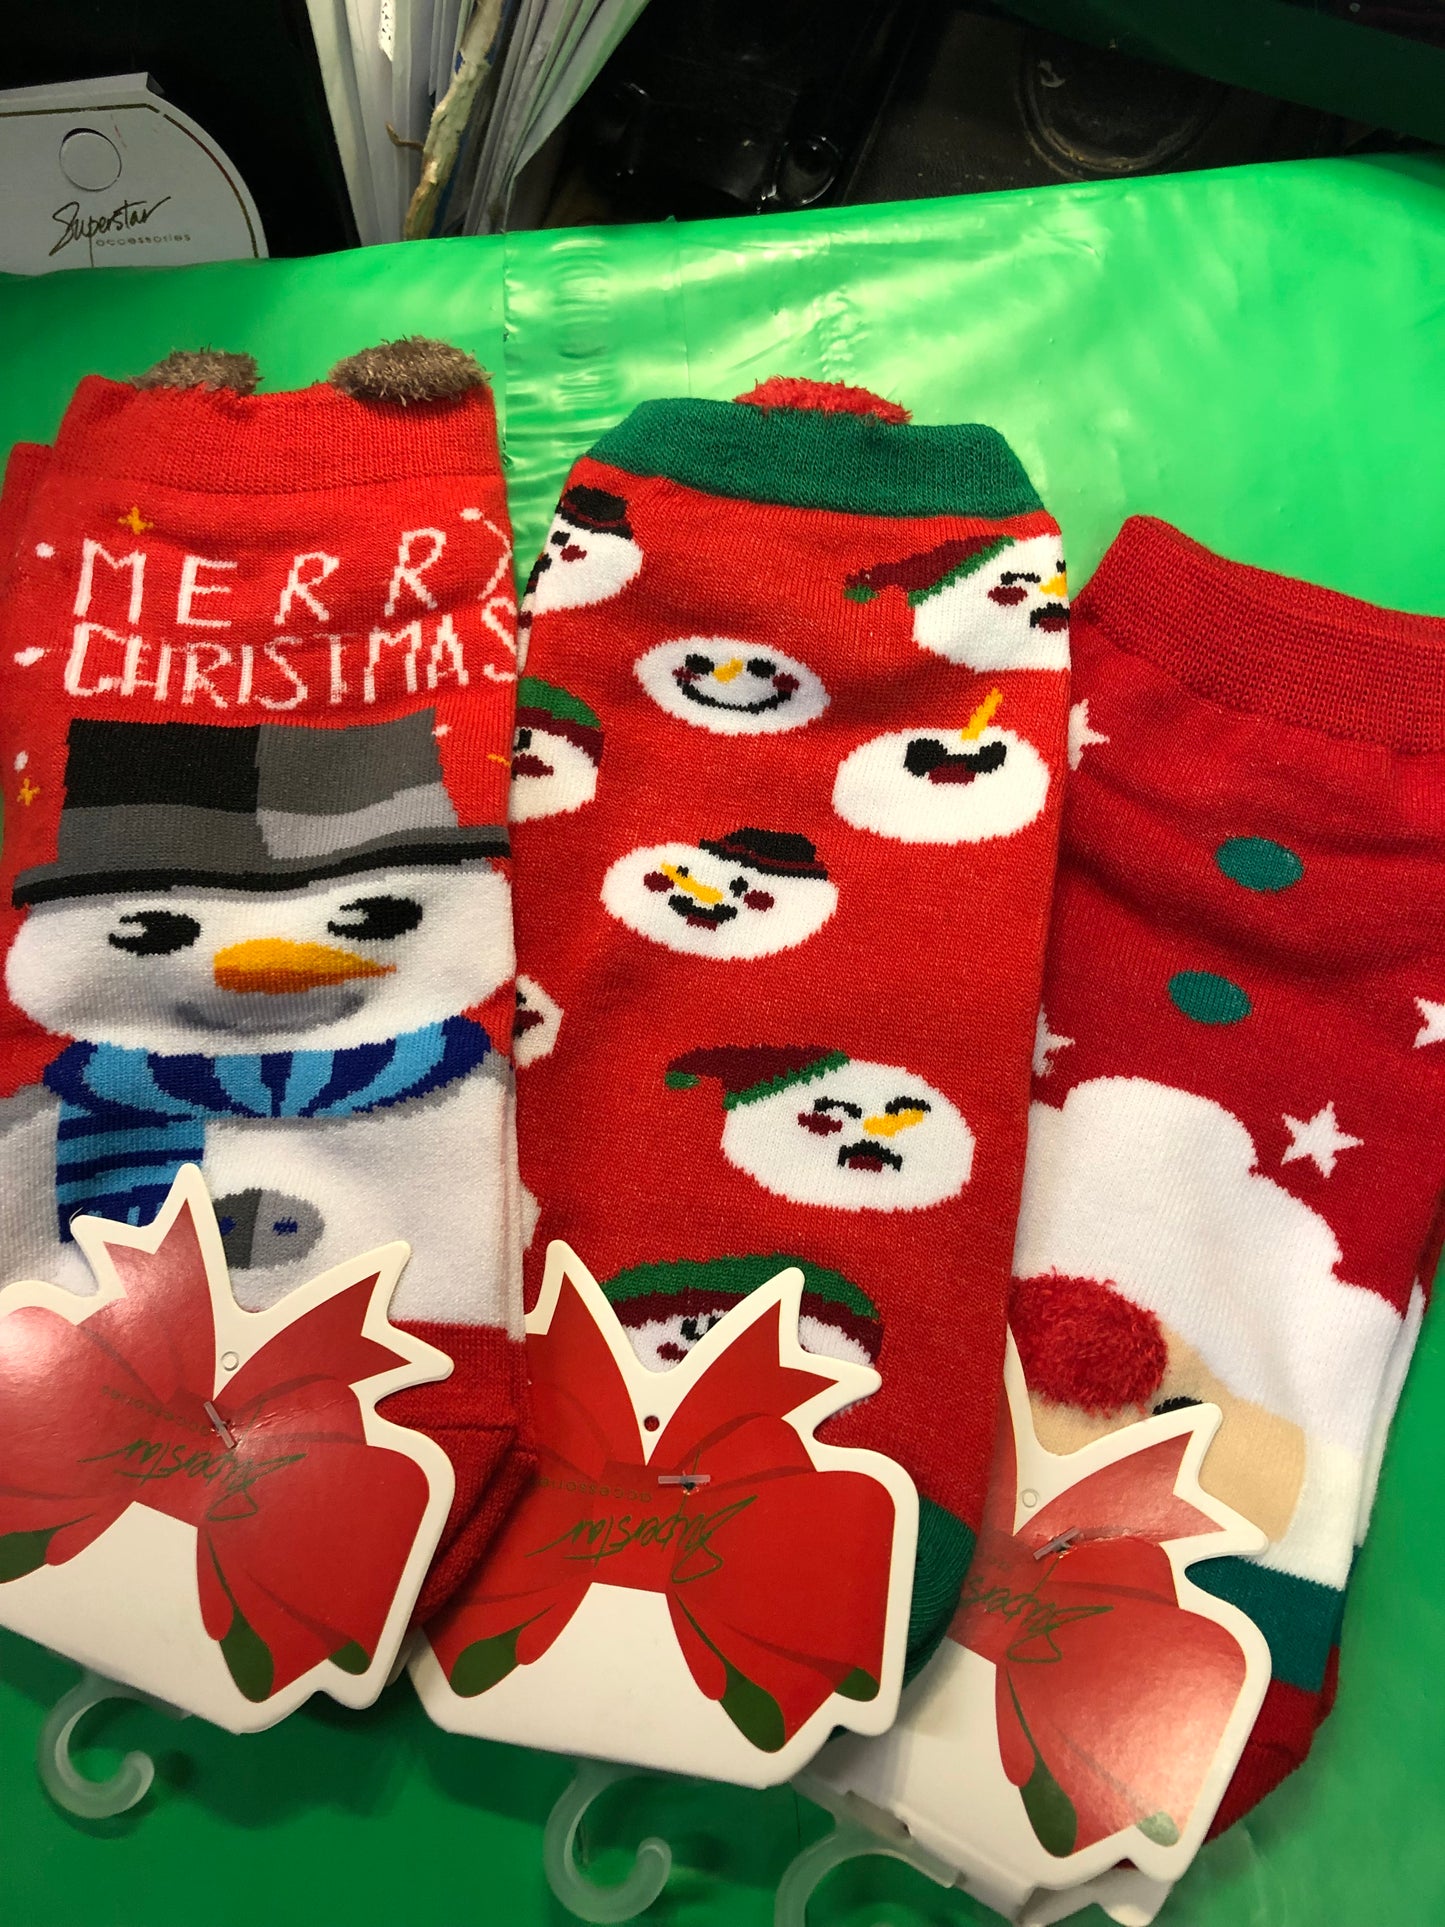 Woman Christmas  Ankle Socks "New Arrival" Great Stocking Stuffers $3 each Or 2 For $5.00